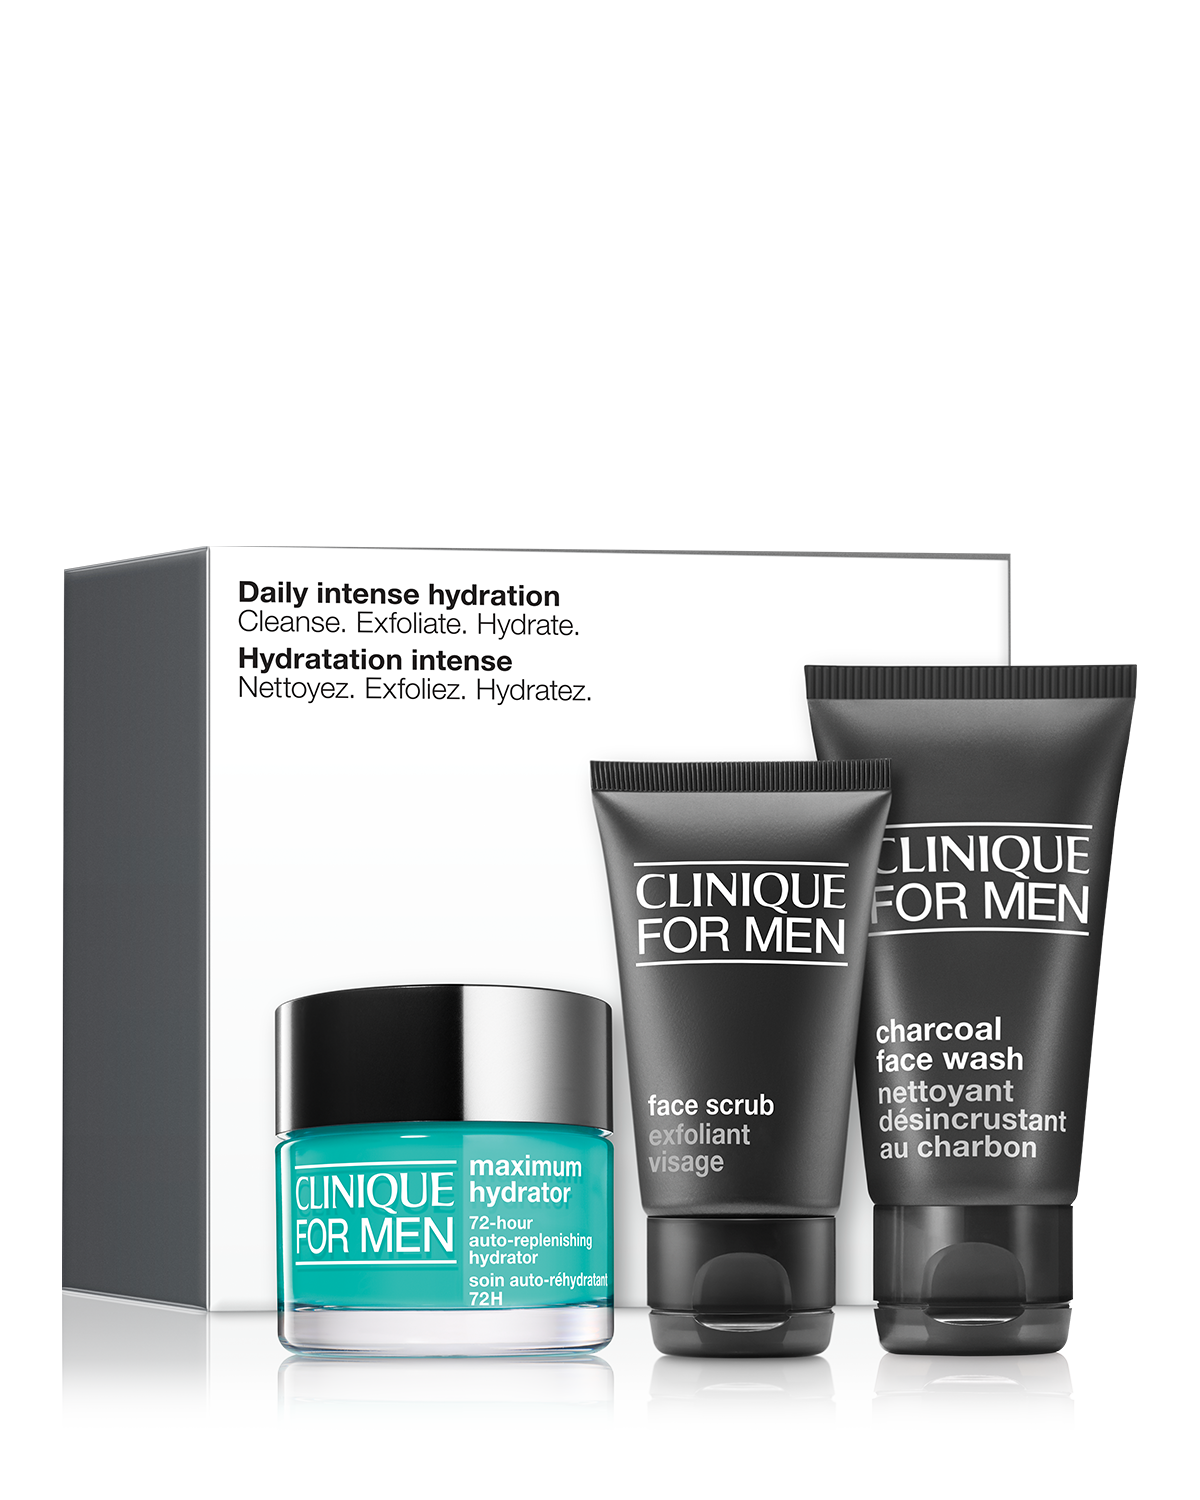 Daily Intense Hydration Skincare Set for Men